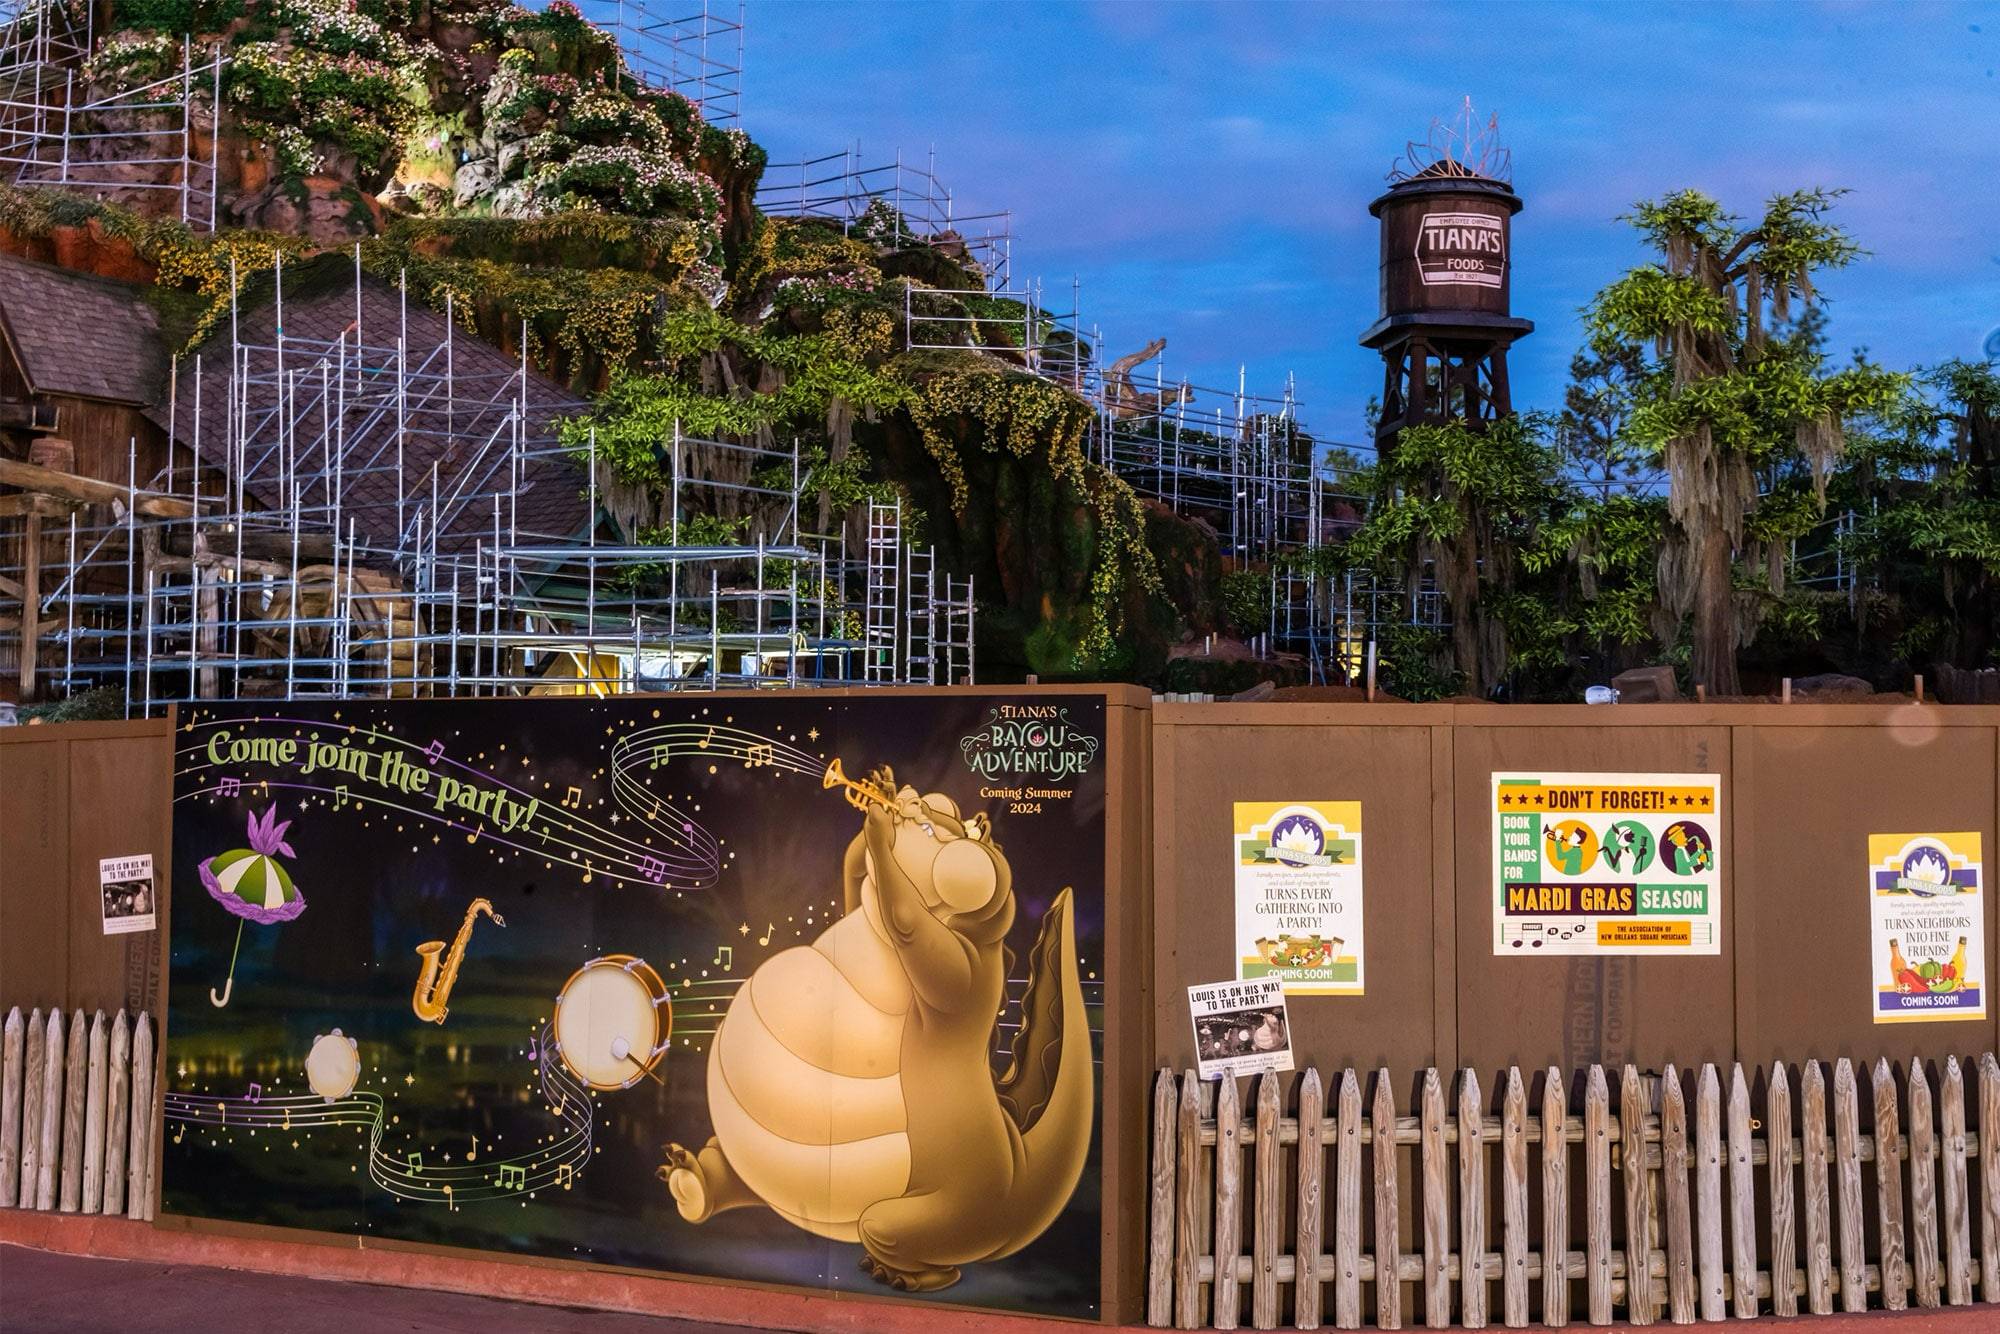 Pricing and Details Announced for D23 Preview of Tiana's Bayou Adventure